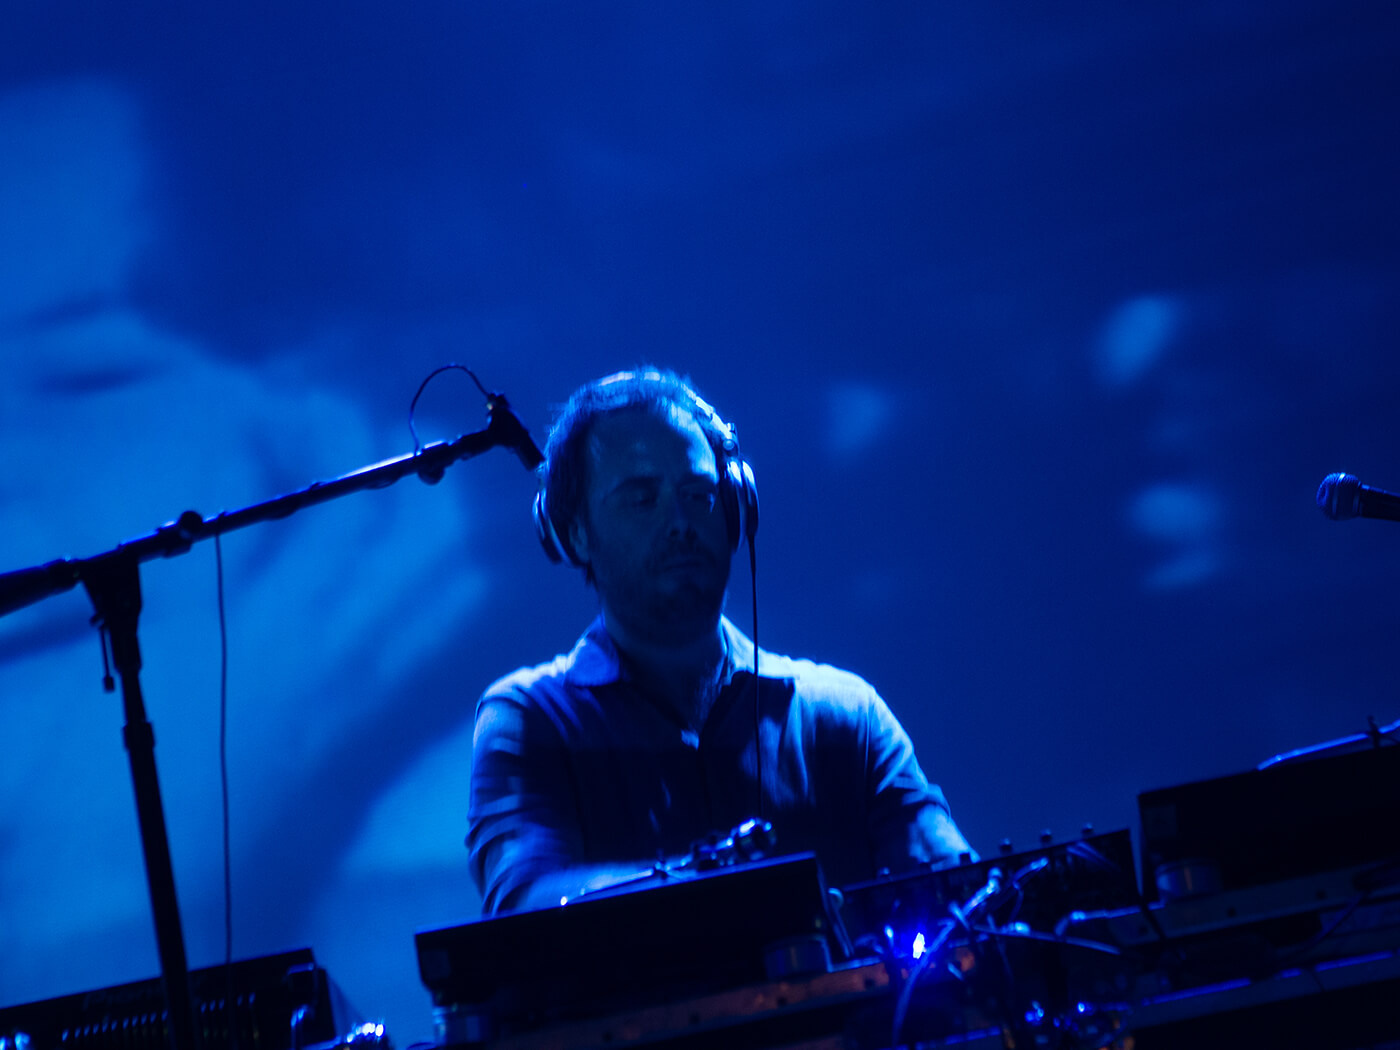 Cut Chemist performing with live visuals in the background, photo by Cut Chemist